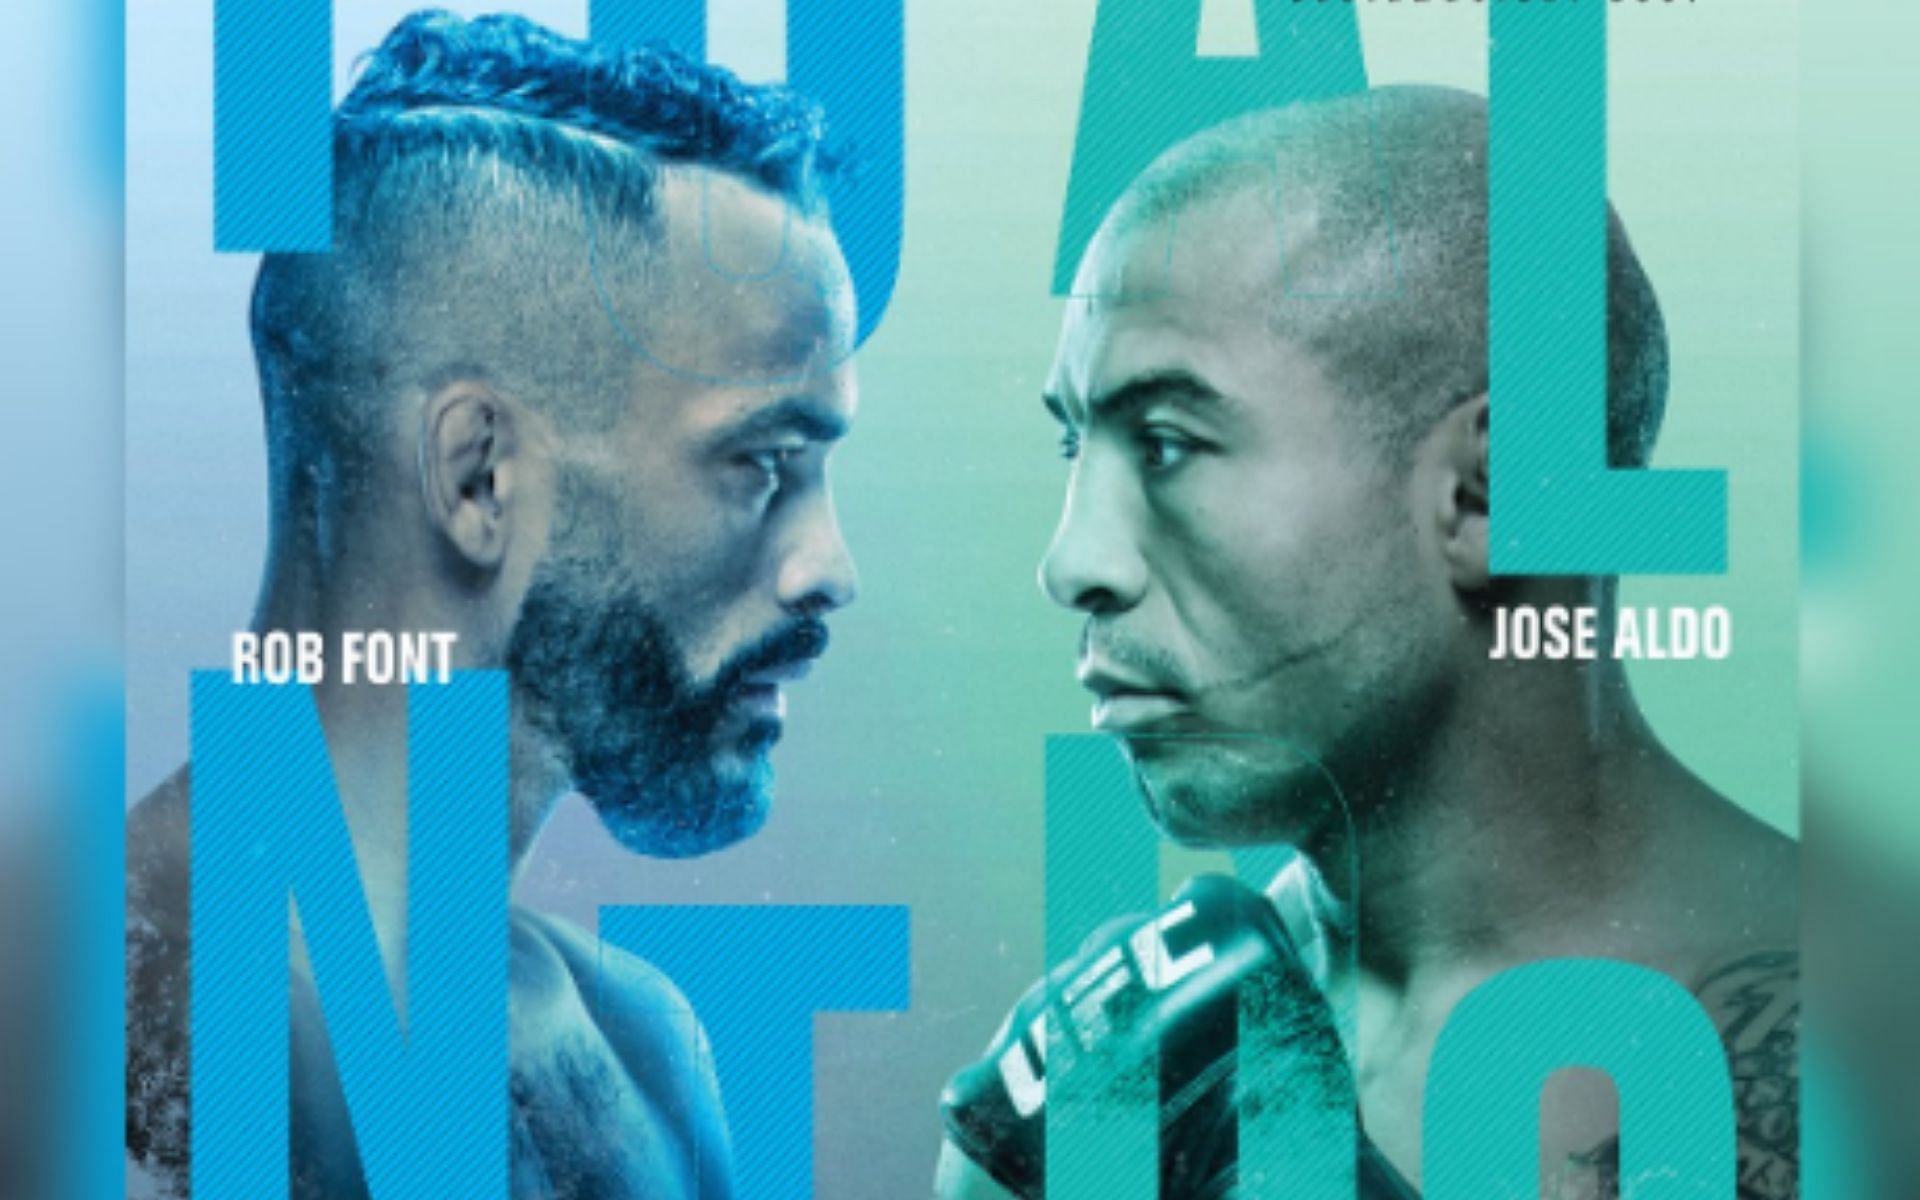 The official poster of UFC Fight Night: Font vs. Aldo [Image Credit: @ufc on Twitter]